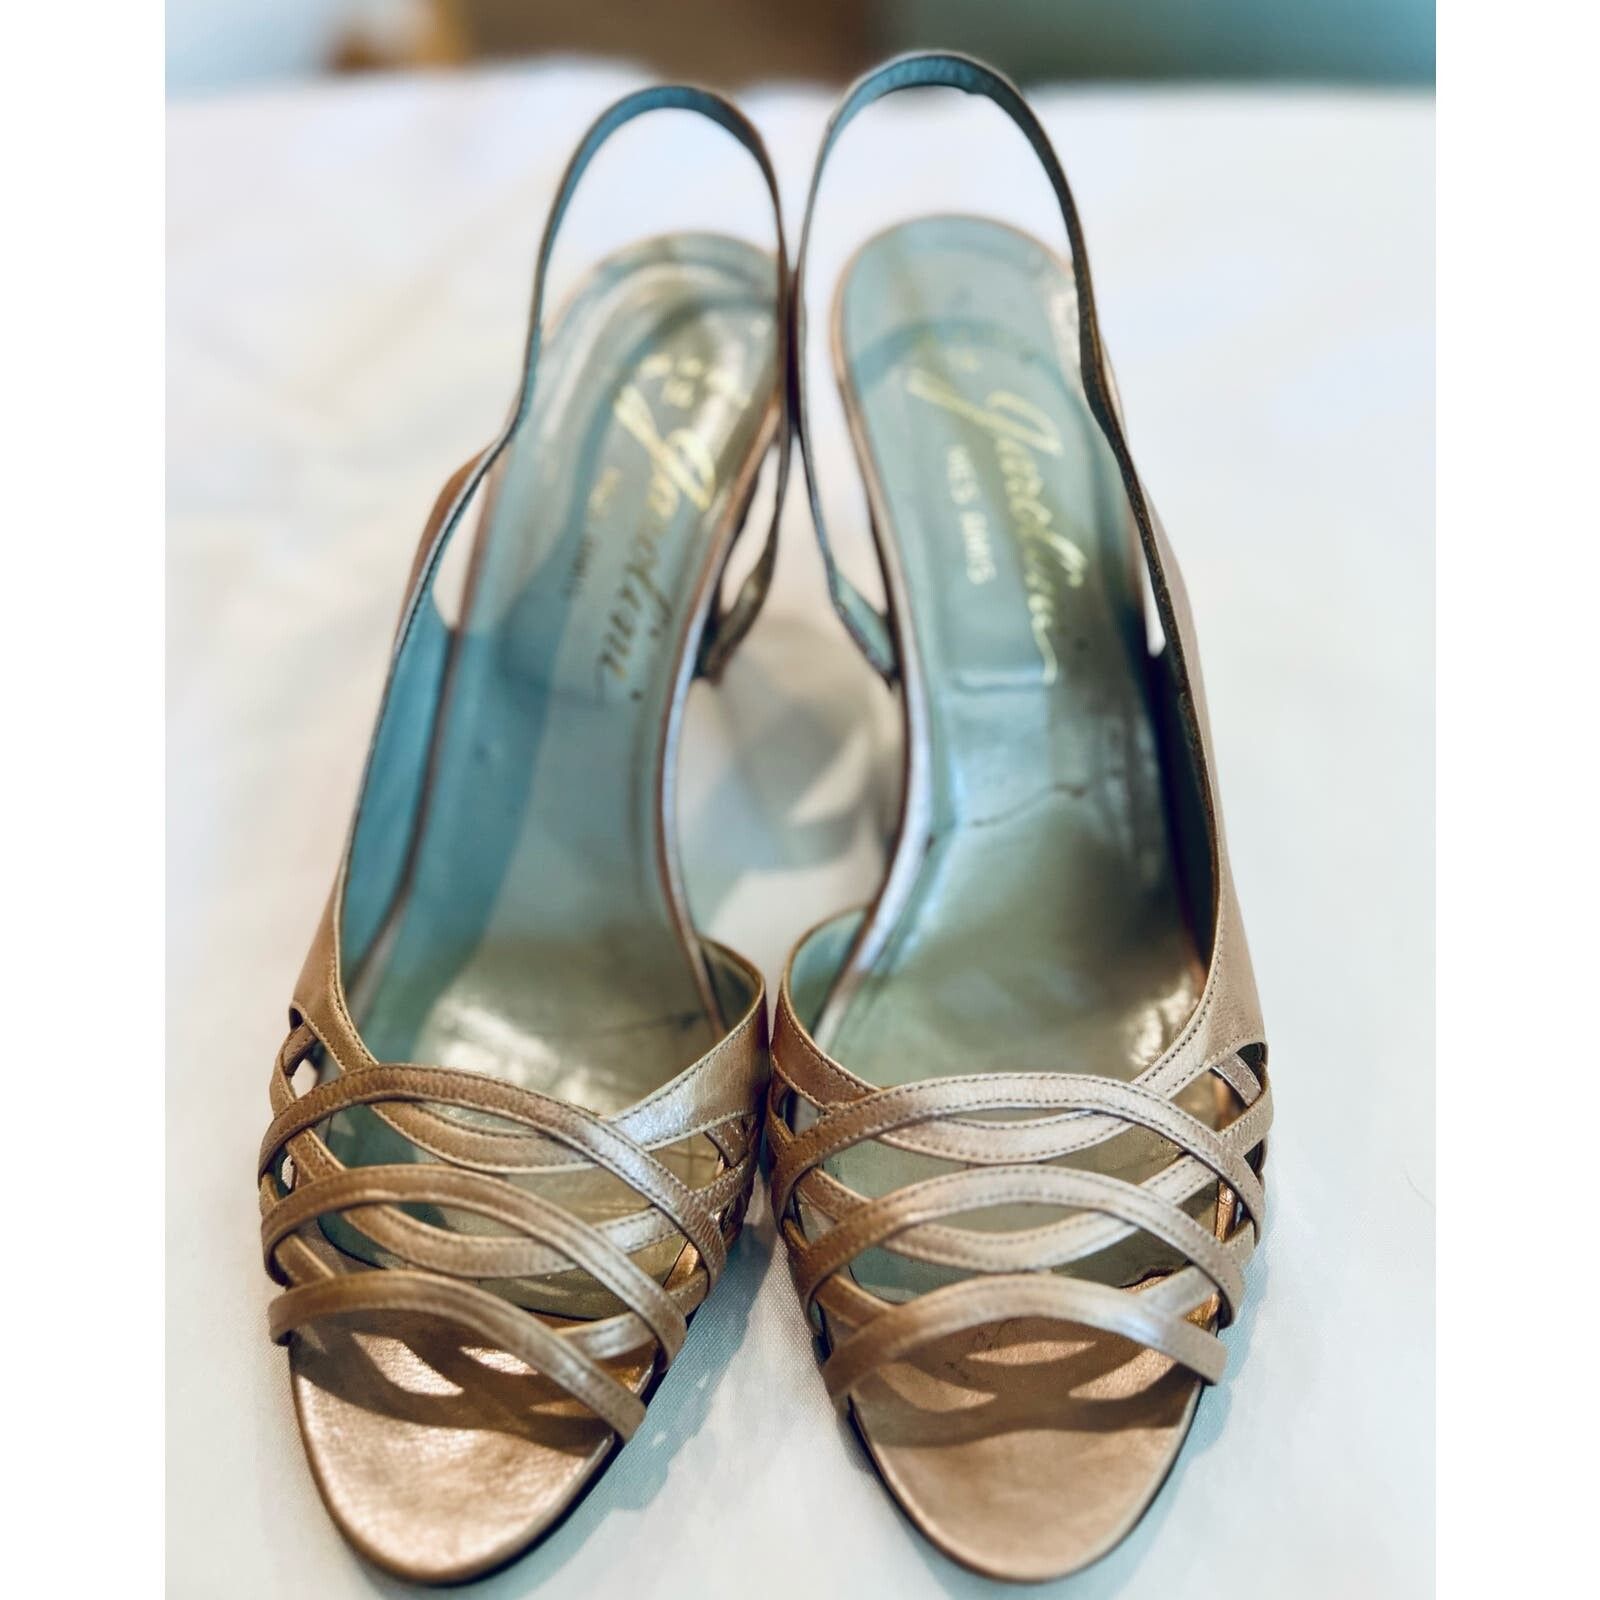 Other Rare VTG Garolini rose gold slingback peep toes, size 7.5M Size US 7.5 / IT 37.5 - 1 Preview